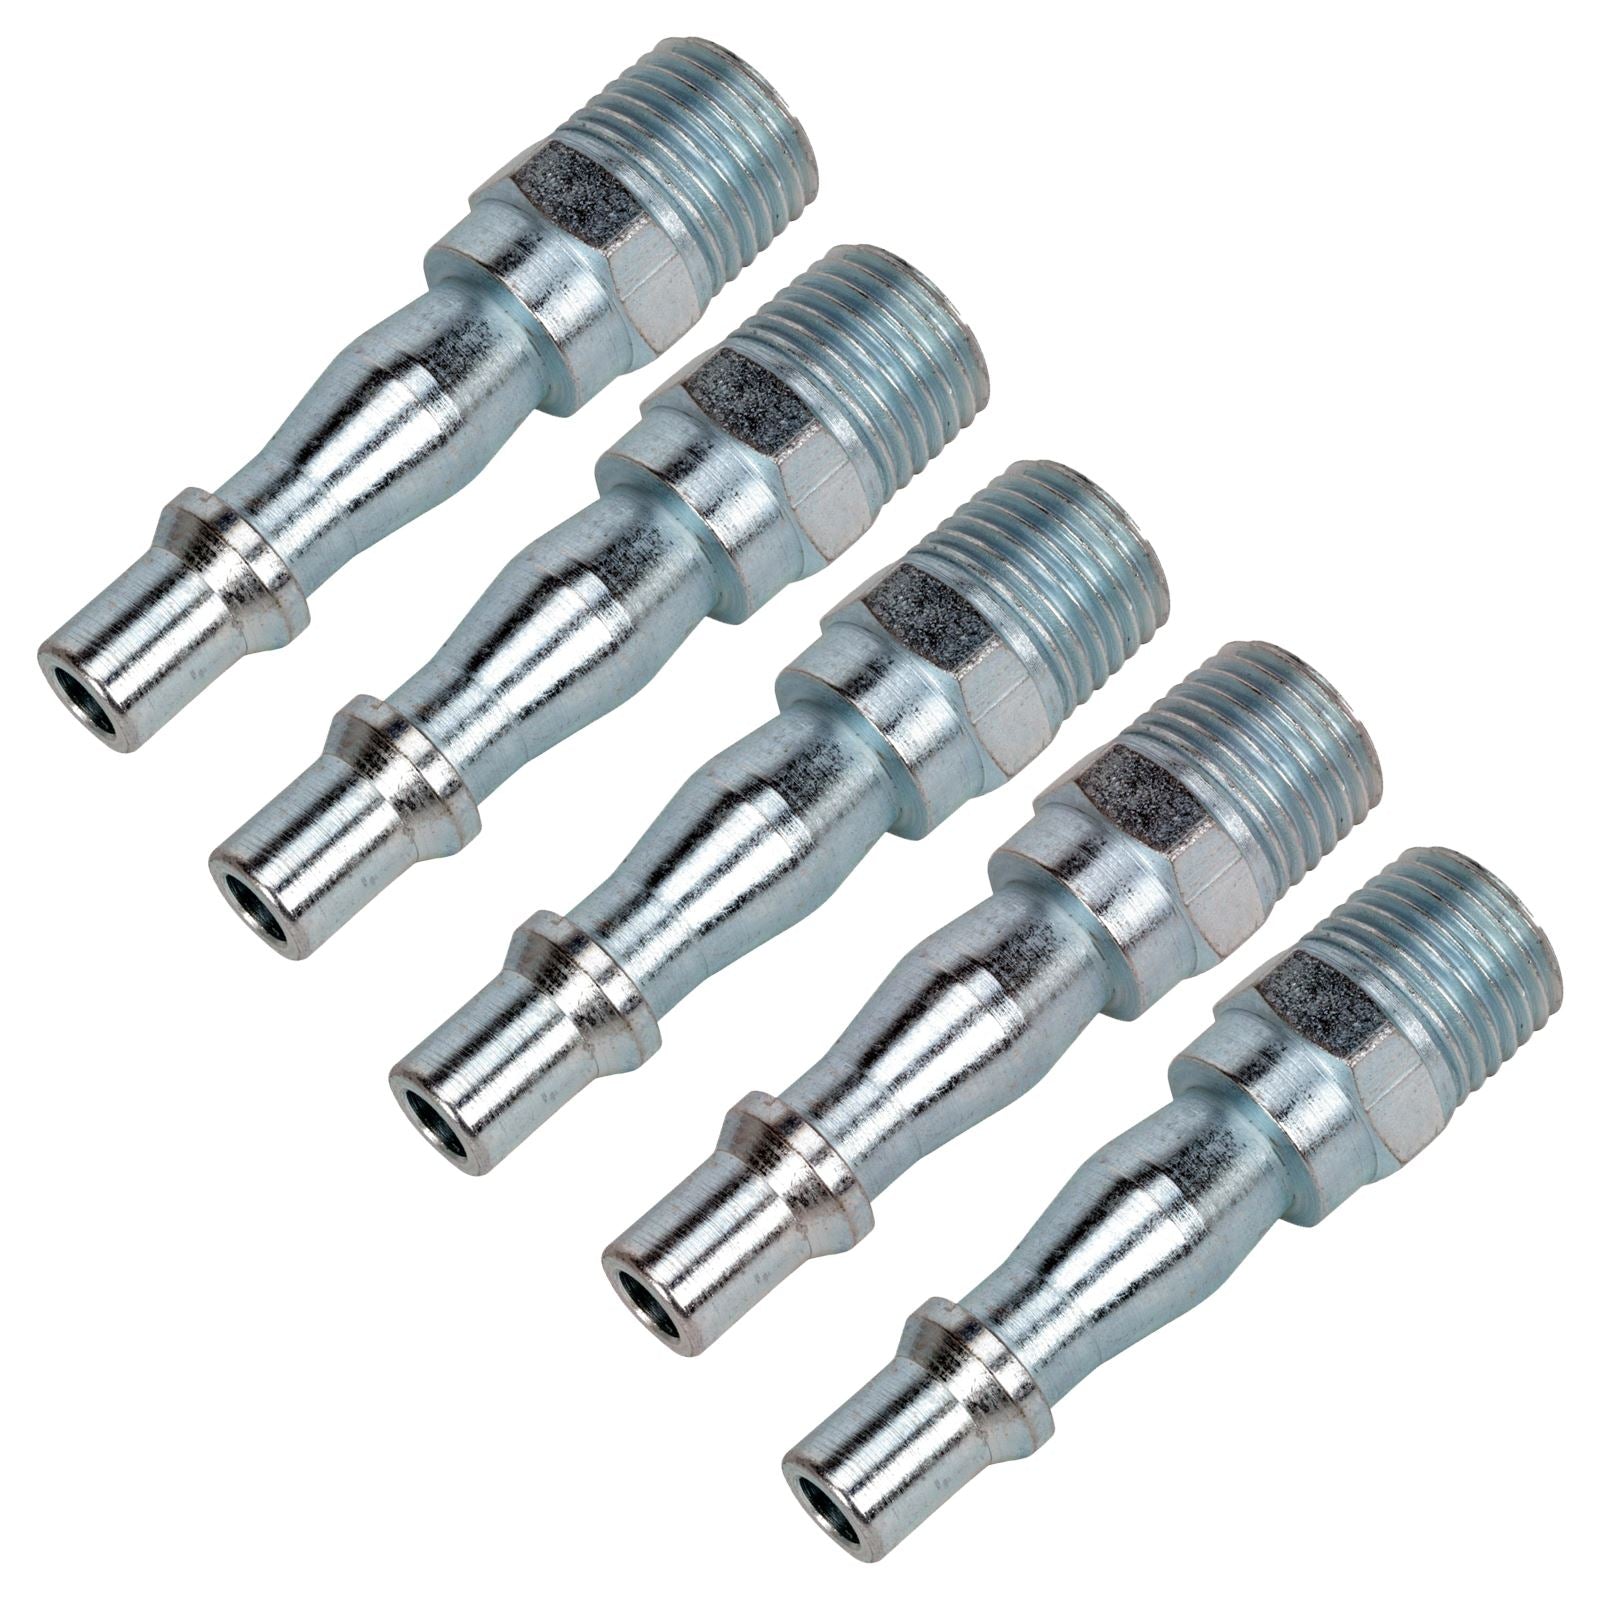 Sealey 5 Pack 1/4" BSPT Male Screwed Bayonet Adaptor Air Line Fitting Connector